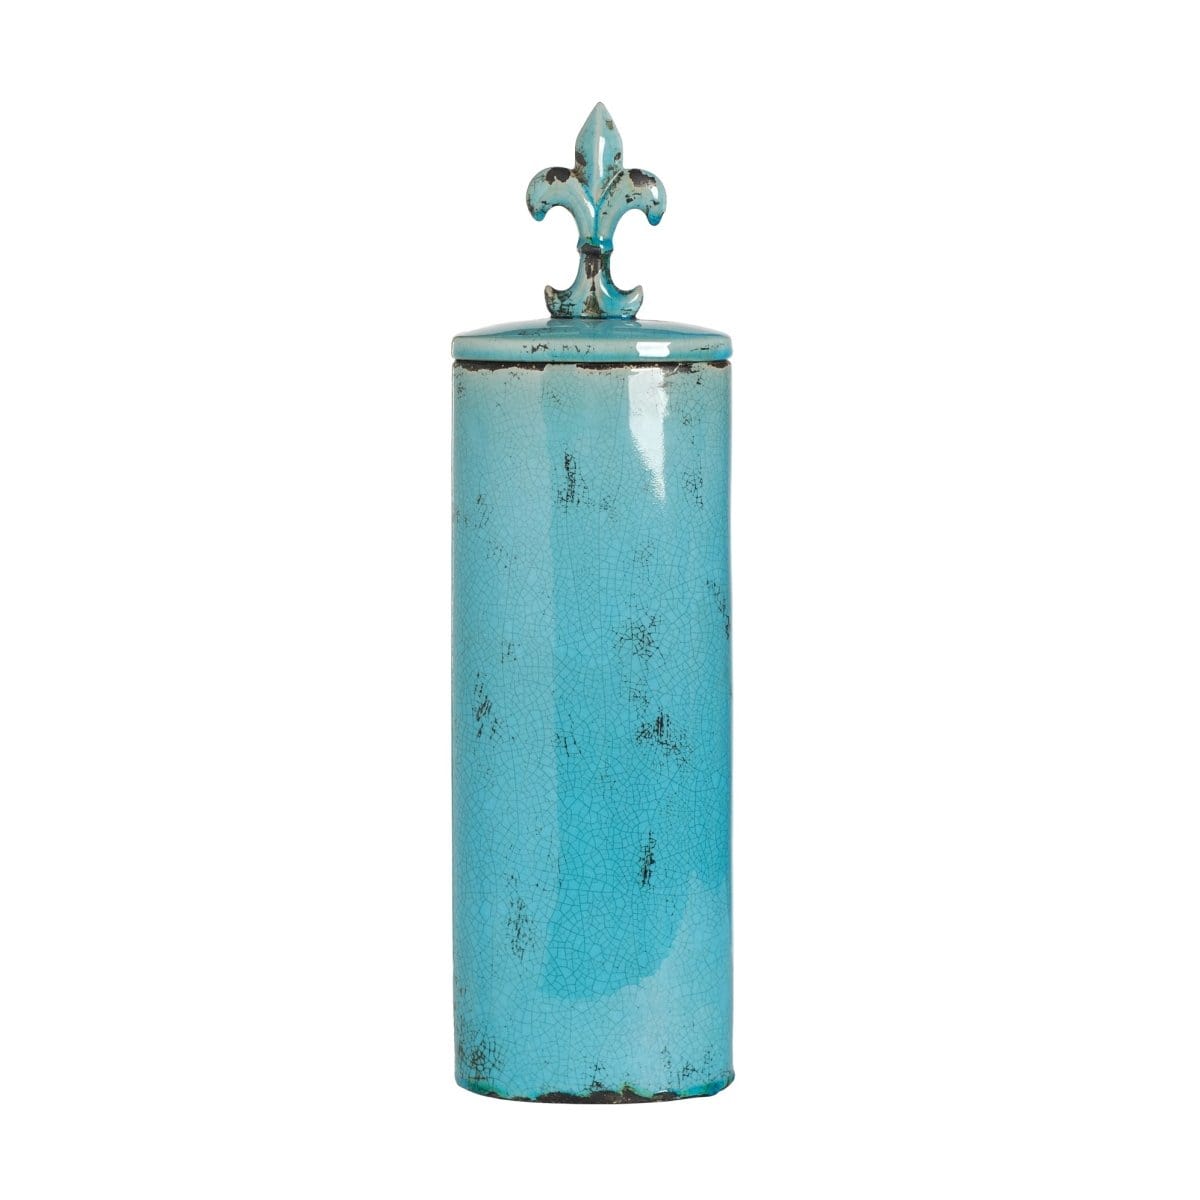 AB-66639-BLUE ora Tall Oval Jar with Fleur-de-lis Finial, Turquoise picket and rail